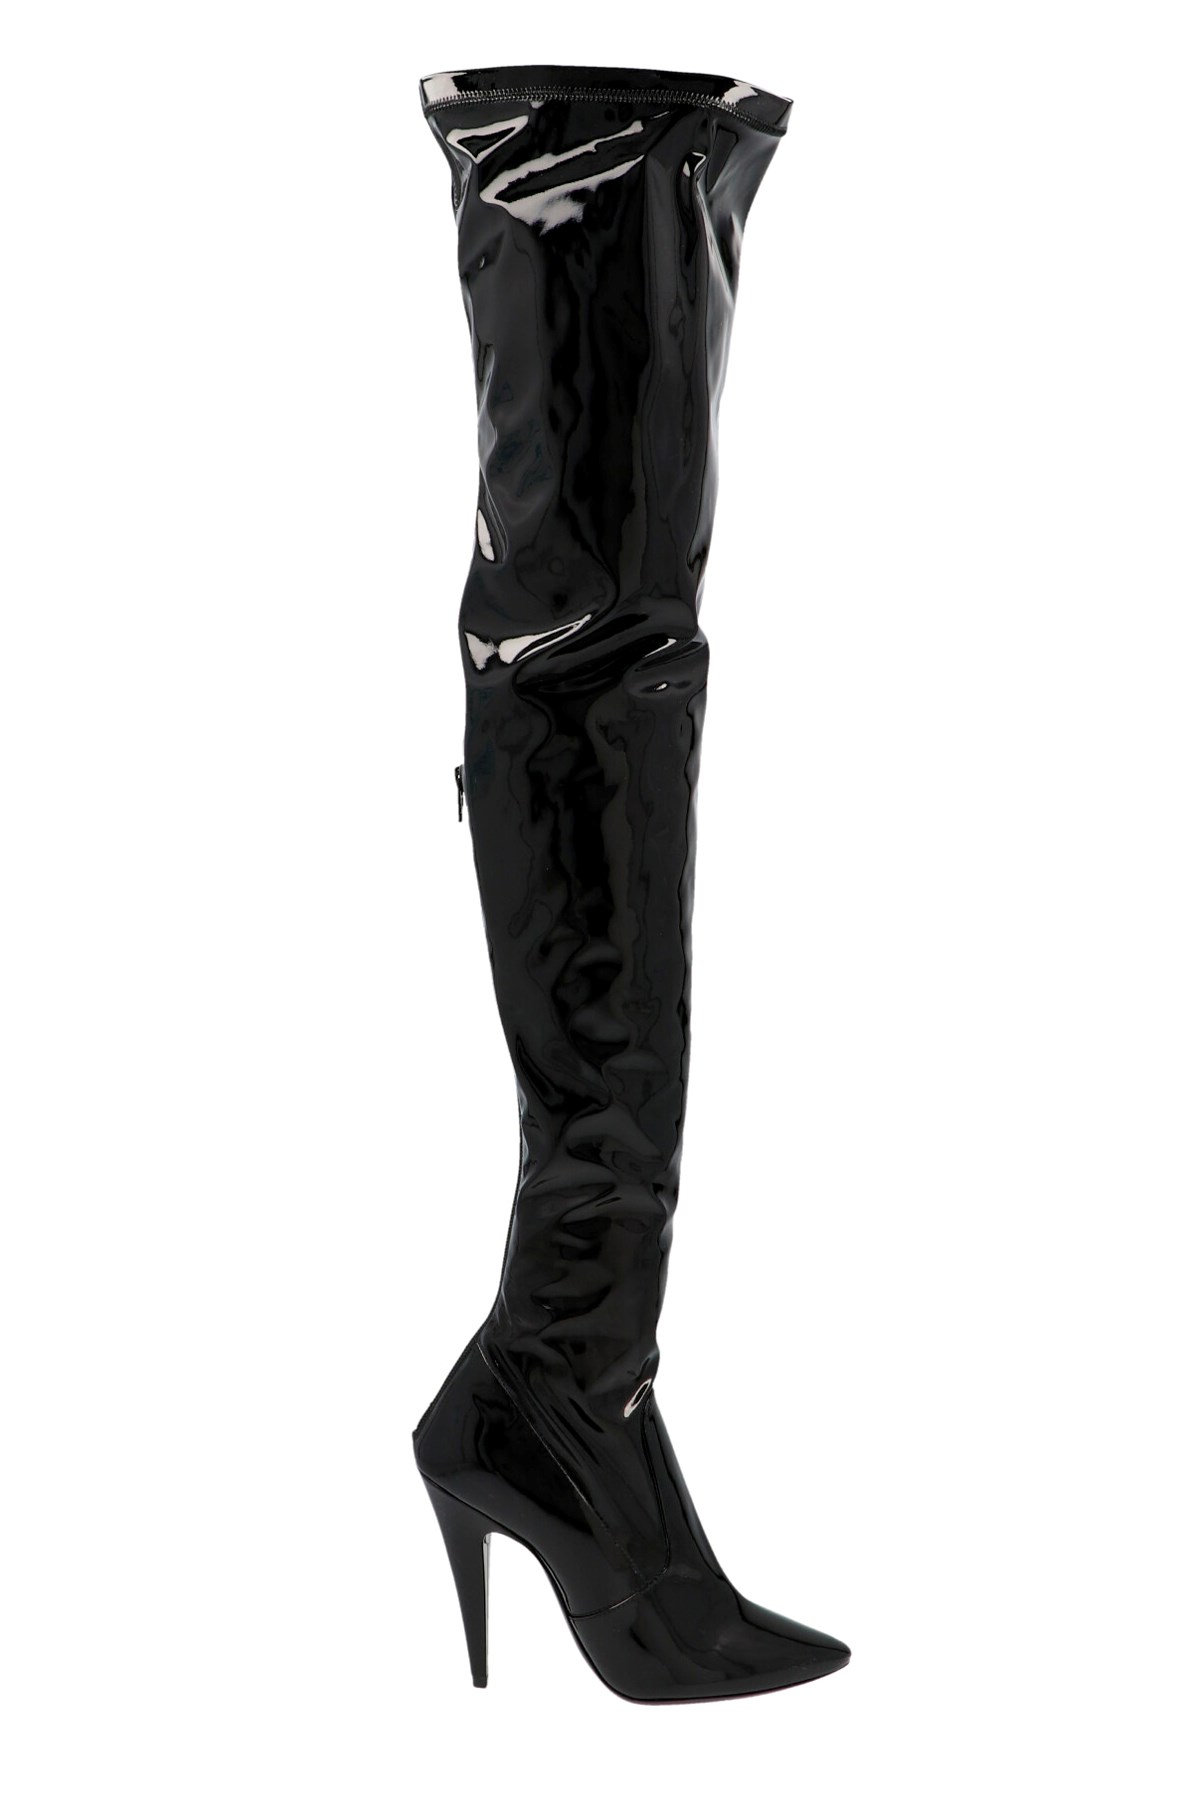 SAINT LAURENT 'Aylah' Over-The-Knee Boots